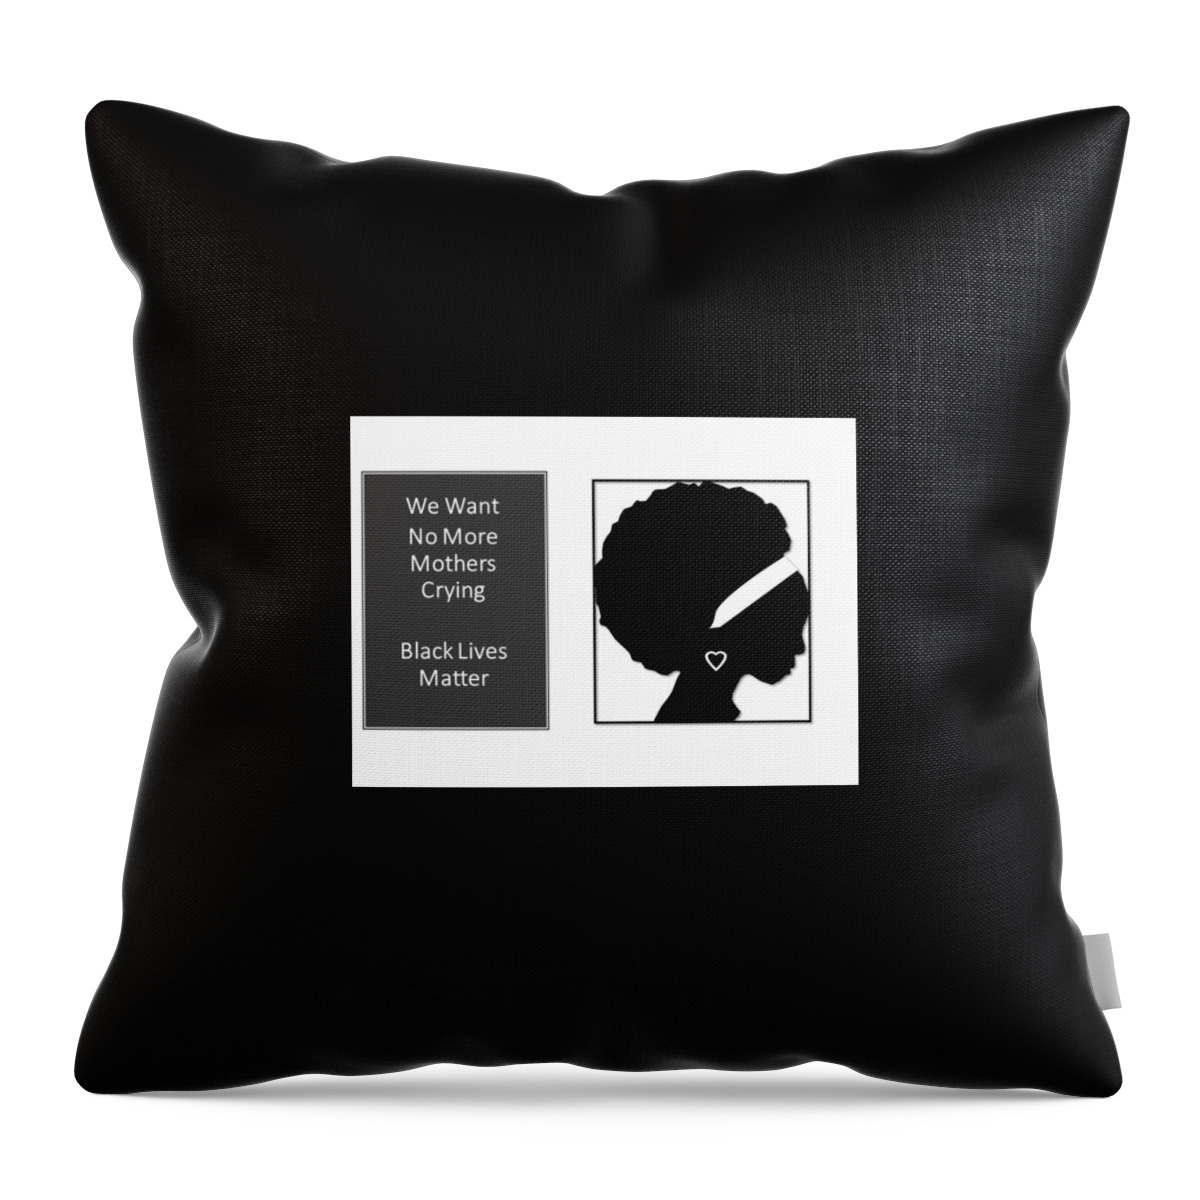 Blm Throw Pillow featuring the mixed media Mothers Crying Black Lives Matter by Nancy Ayanna Wyatt